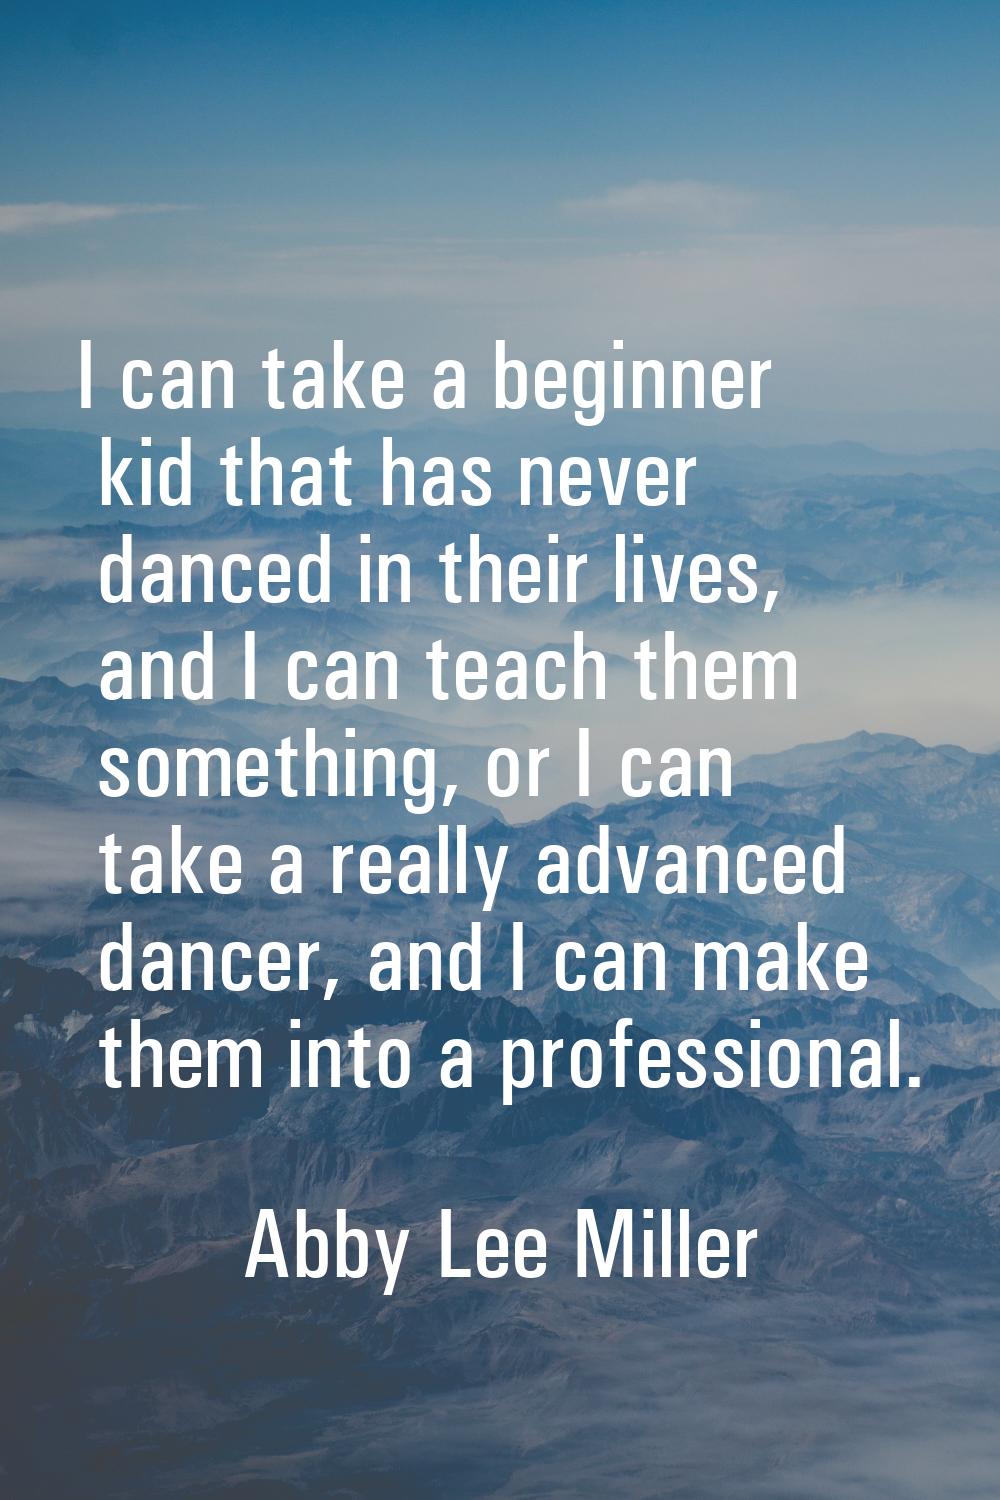 I can take a beginner kid that has never danced in their lives, and I can teach them something, or 